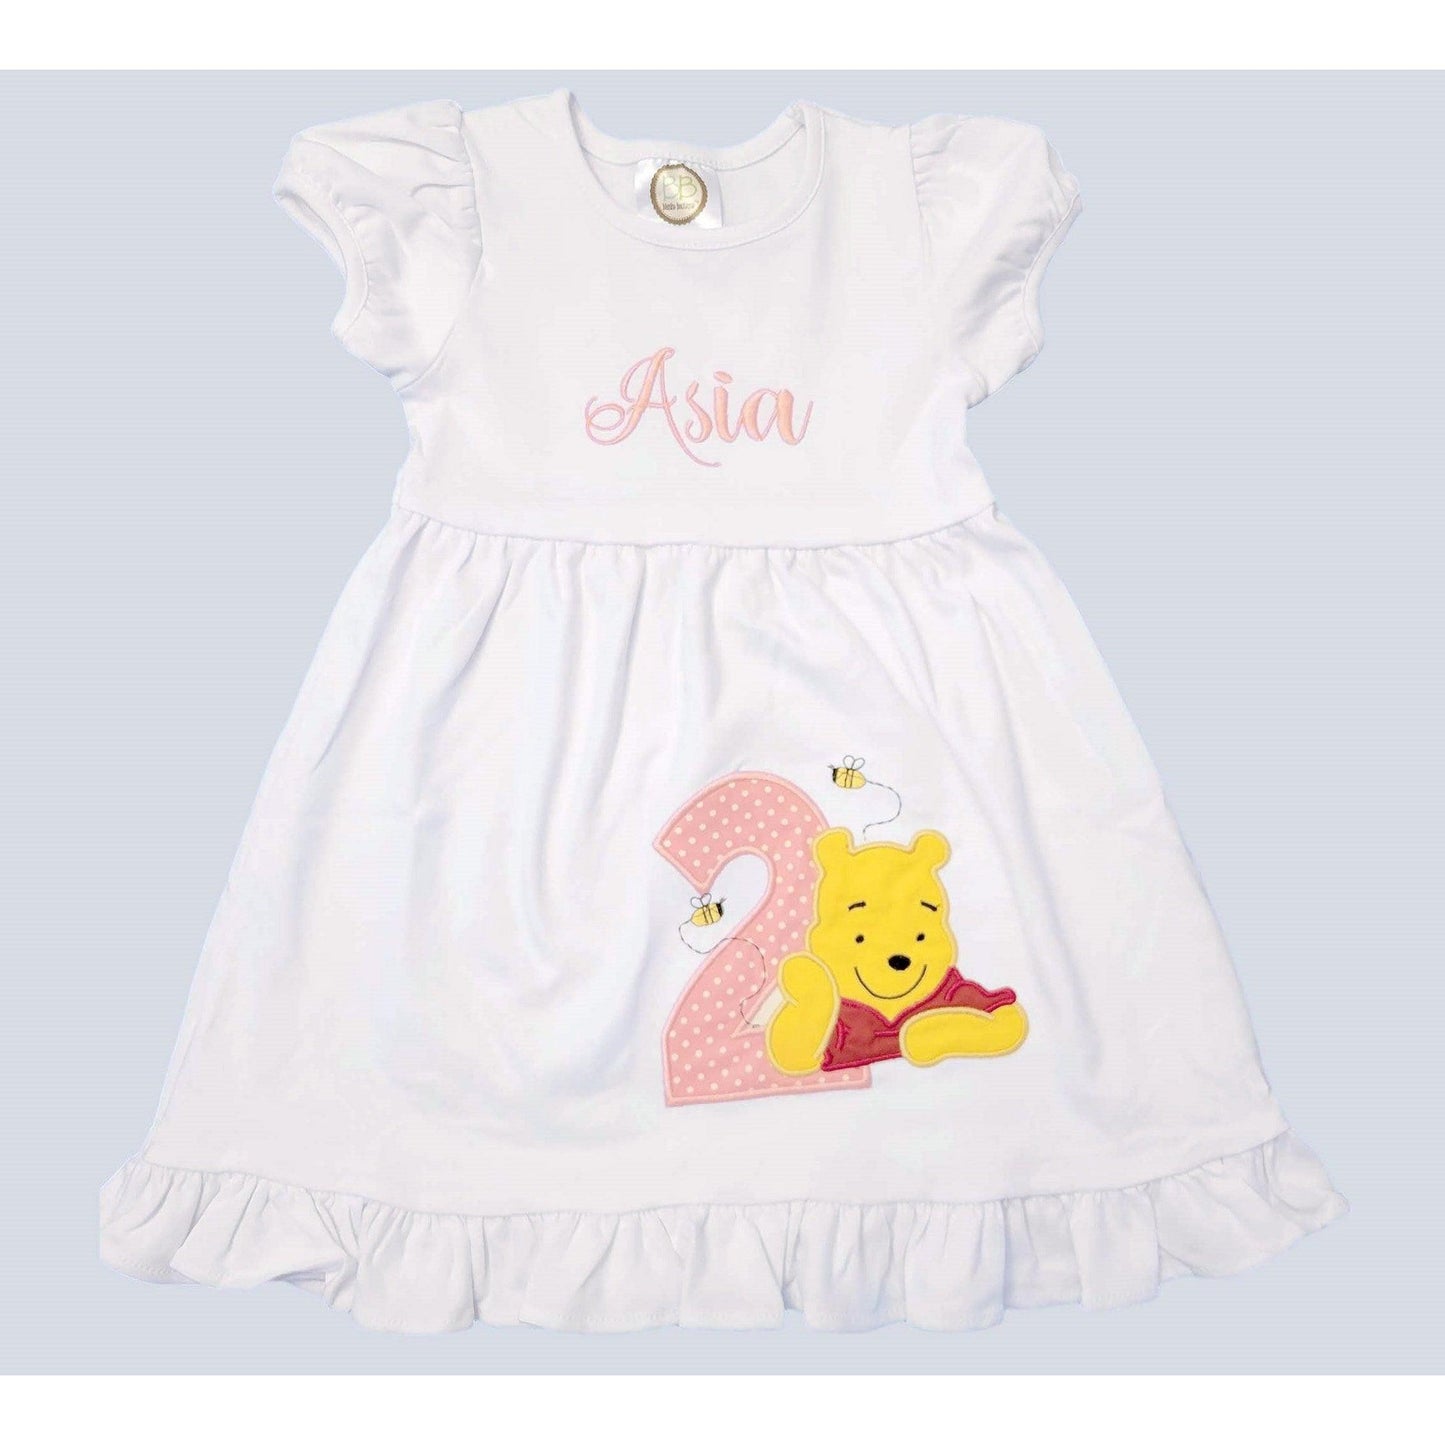 Winnie the Pooh Dress, Pooh Birthday outfit,    Pooh Toddler Dress, Winnie the Pooh Personalized Girls  Dress